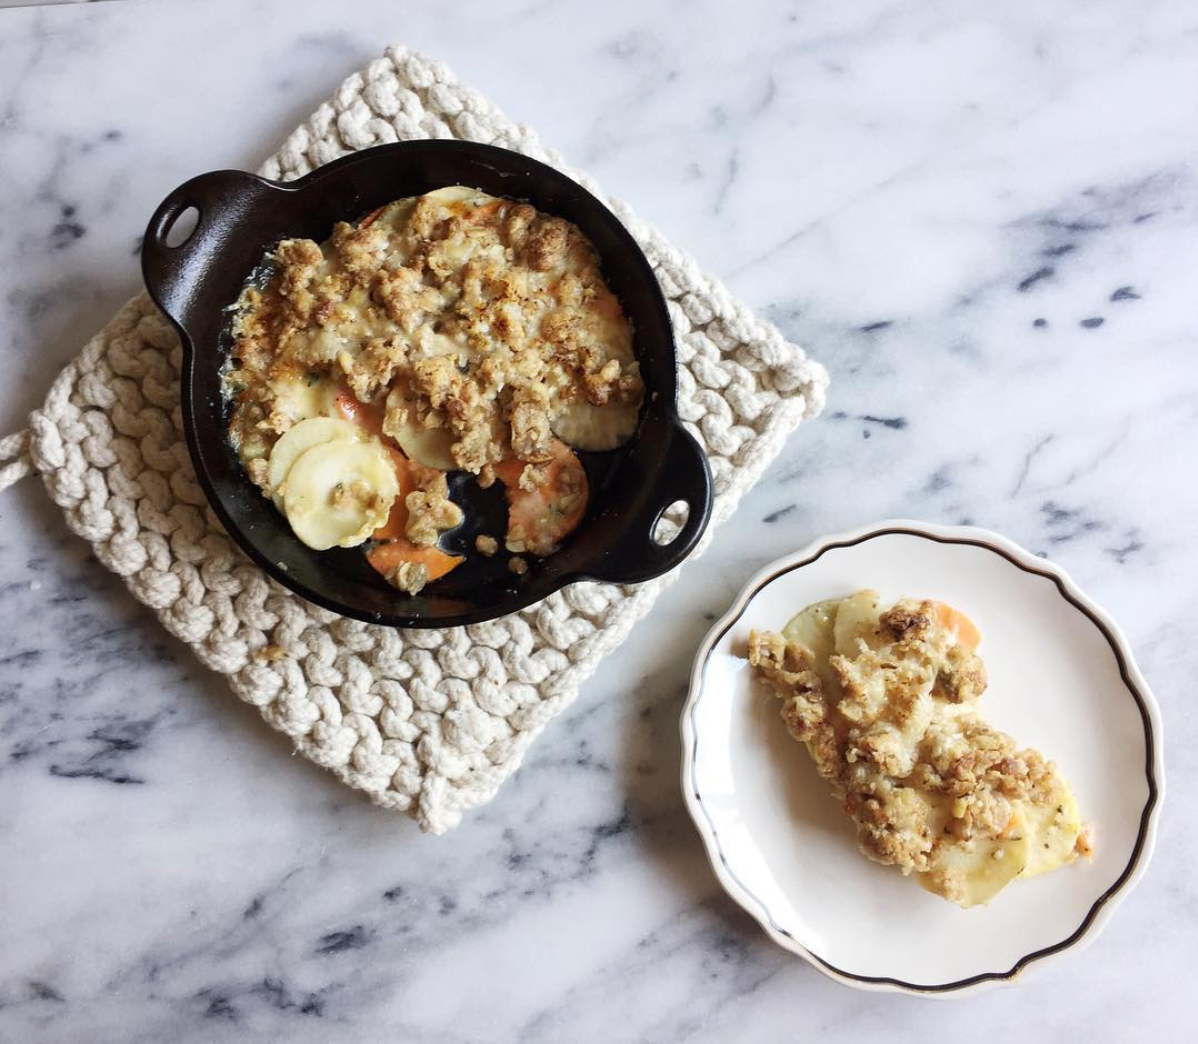 jamie's farm root vegetable gratin local brooklyn new york bumble & butter gluten-free granola aged cheddar battersby recipe autumnal sweet potato turnip rutabaga celery root